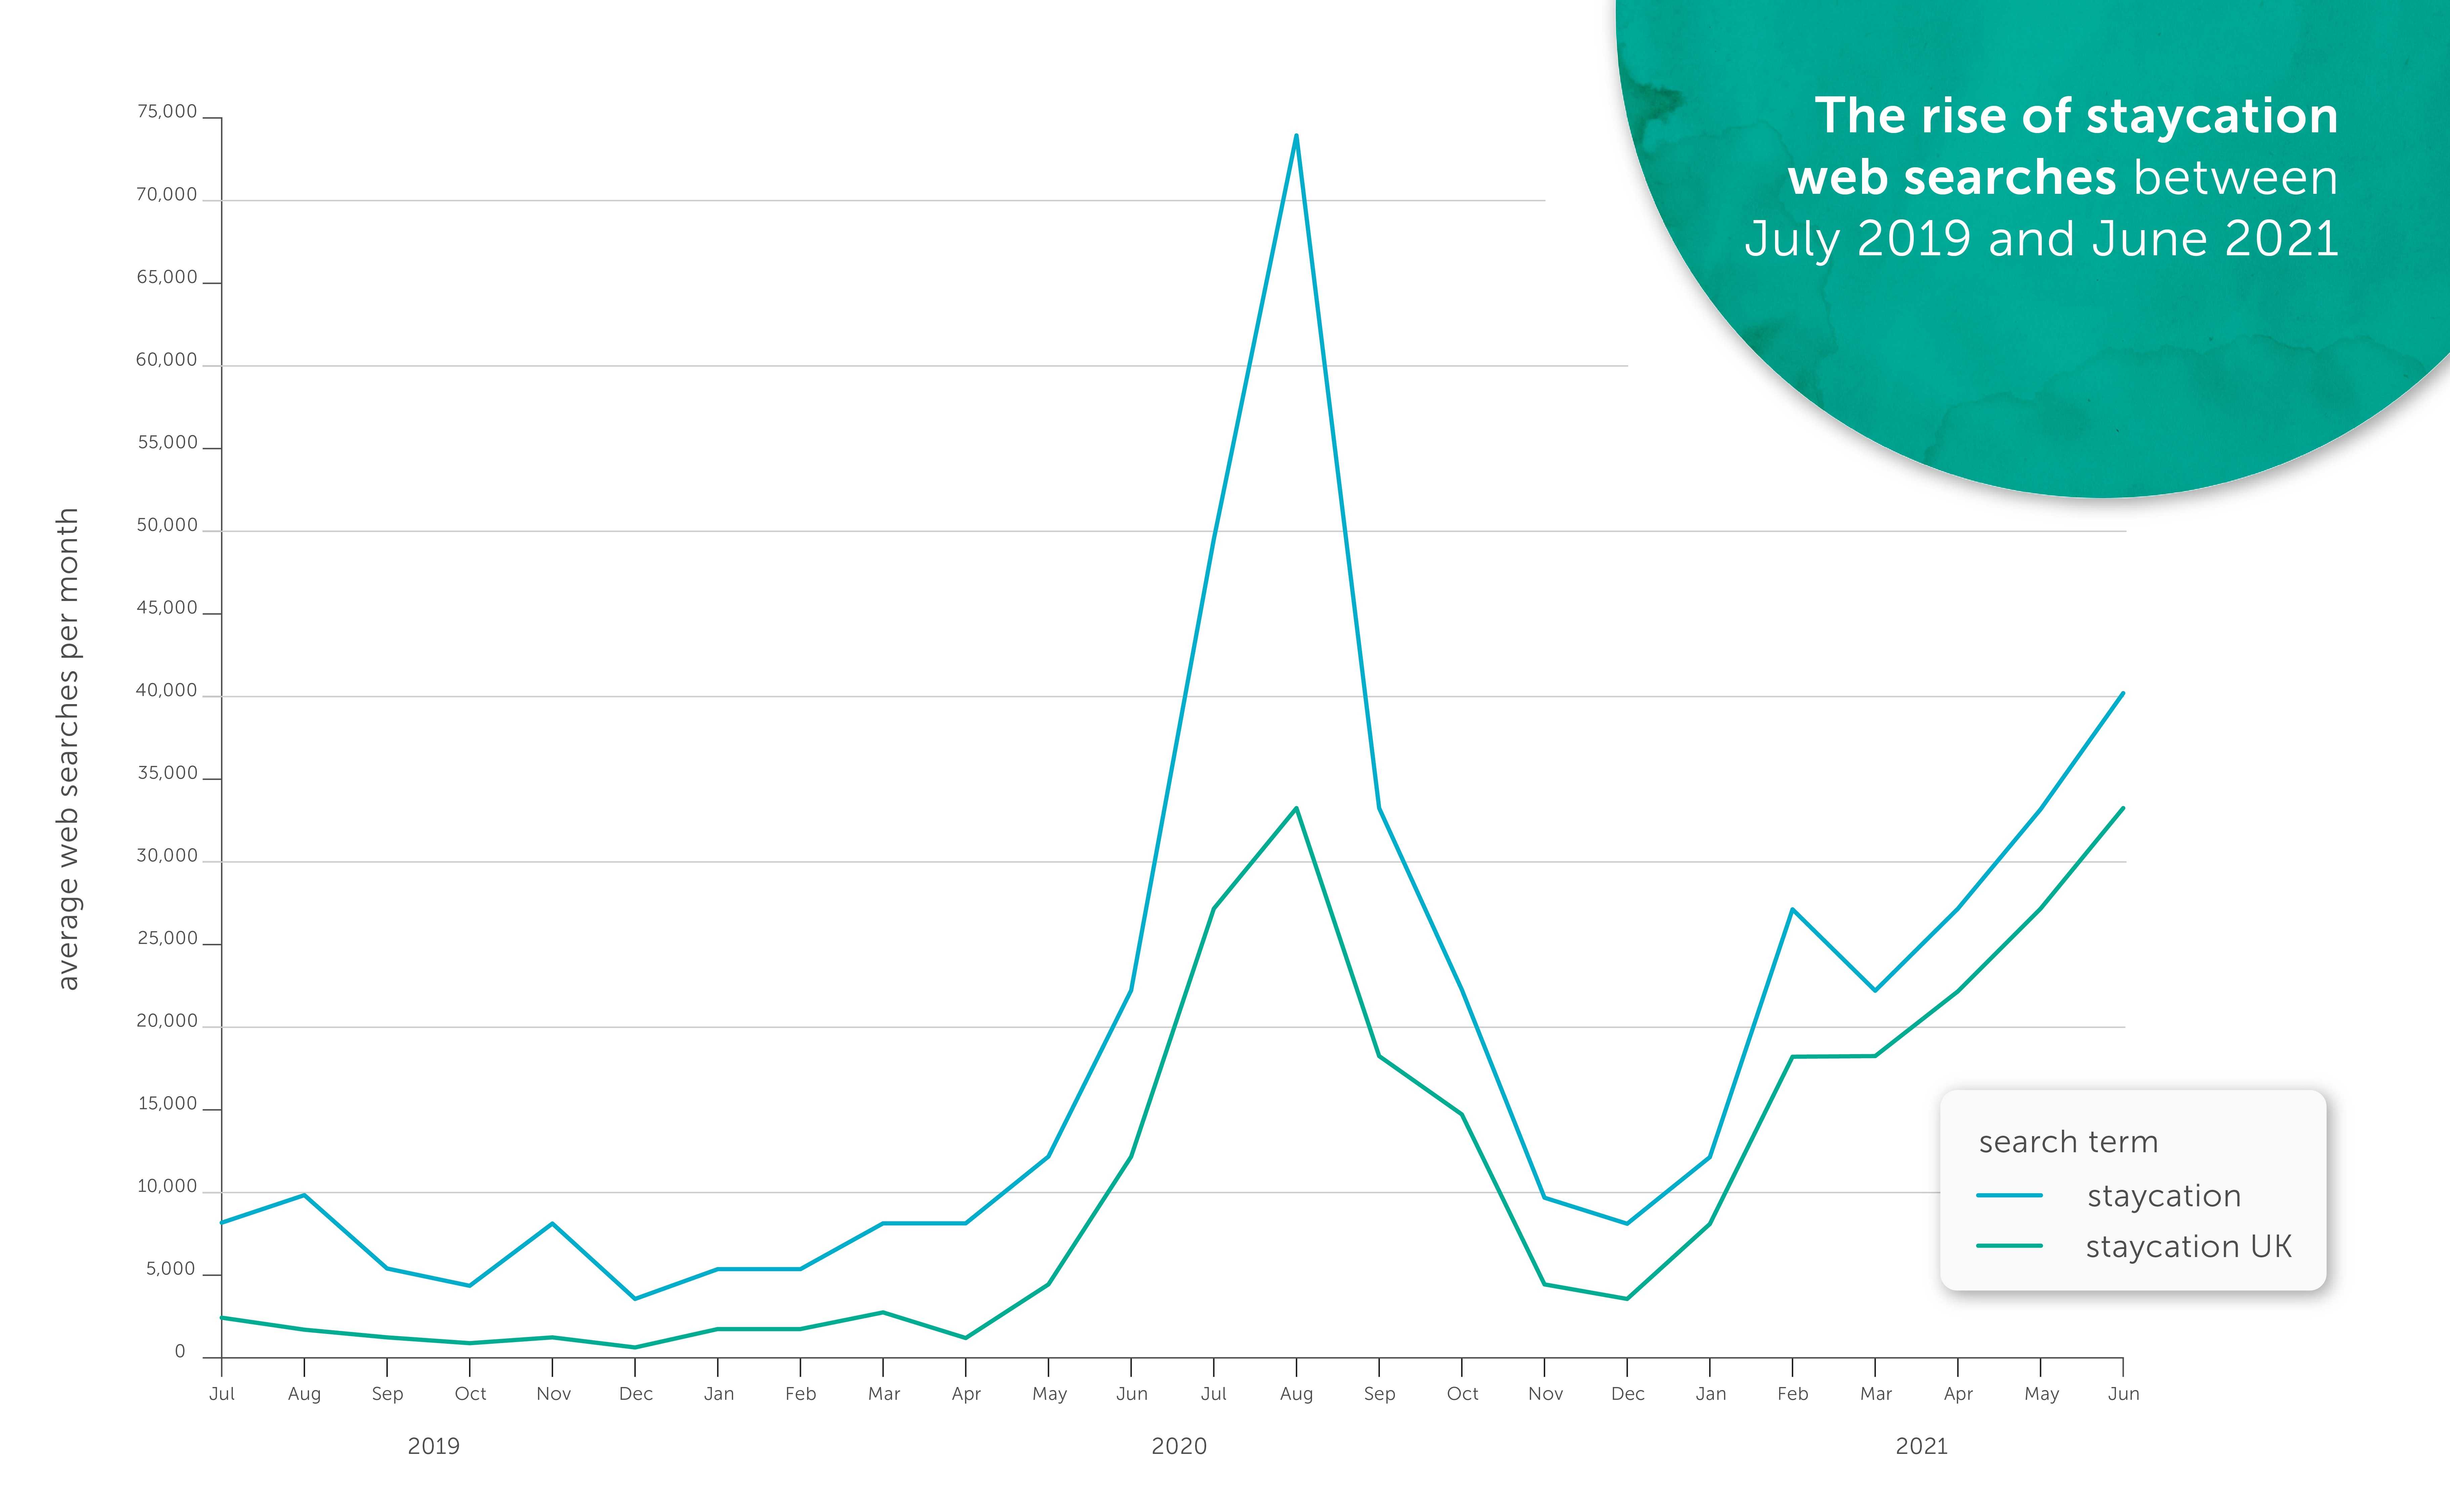 The rise of staycation searches between July 2019 and June 2021